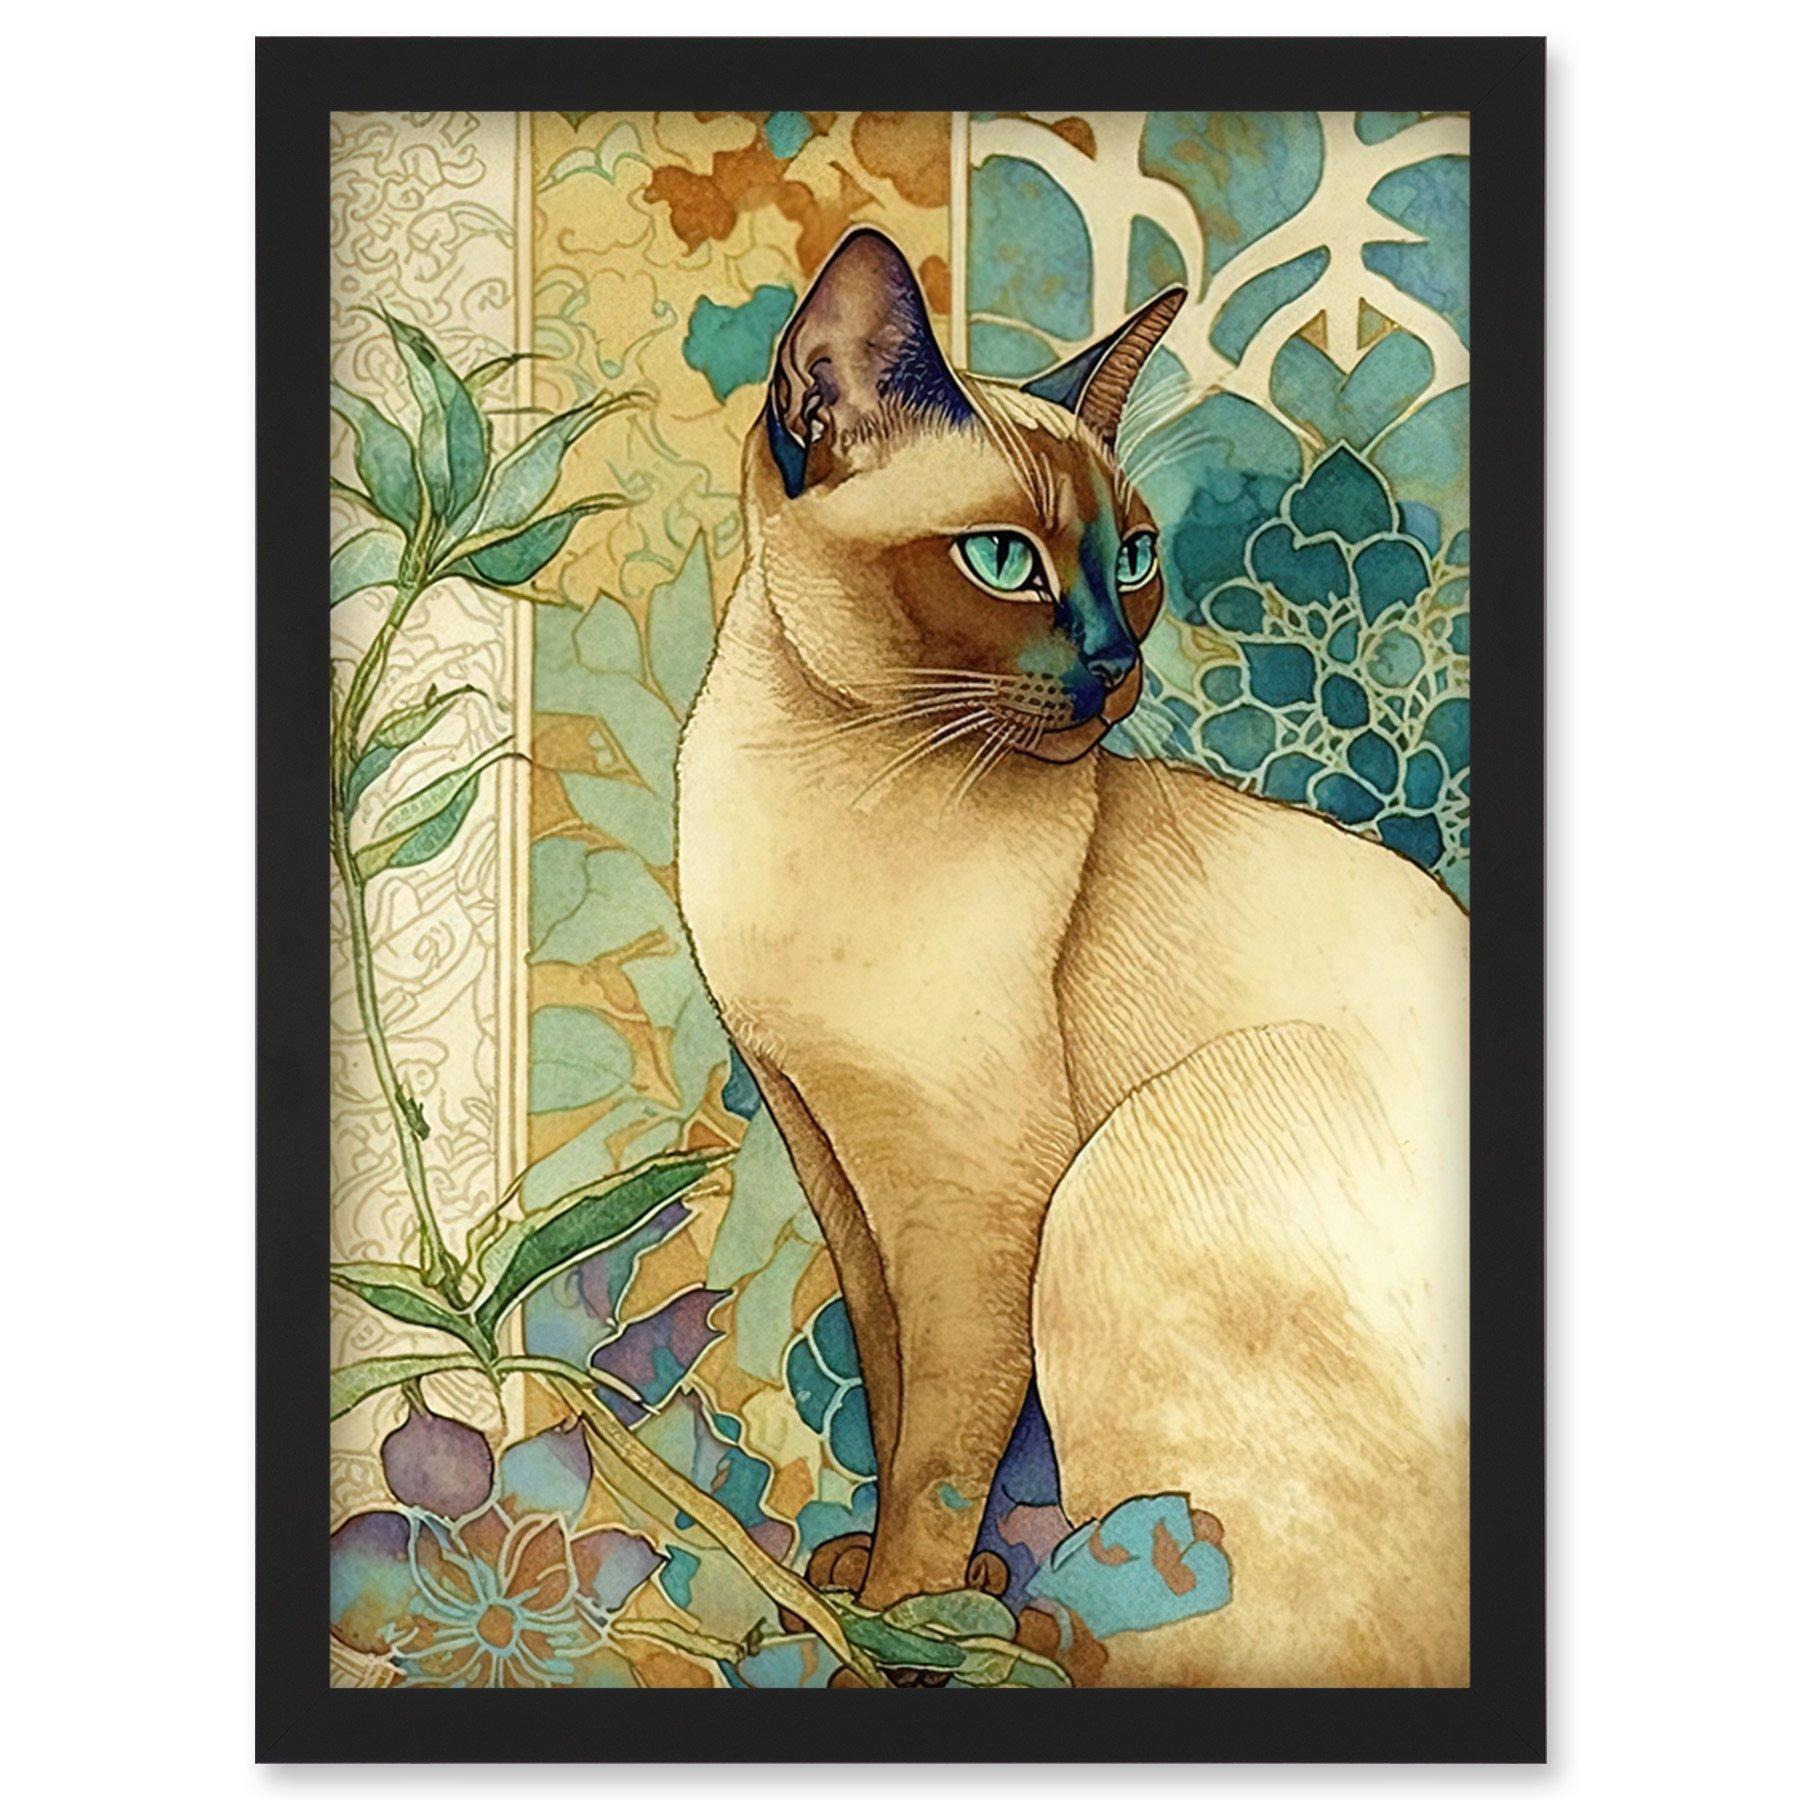 Tonkinese Cat with Art Nouveau Botanical Patterns Colourful Watercolour Illustration Artwork Framed Wall Art Print A4 - image 1